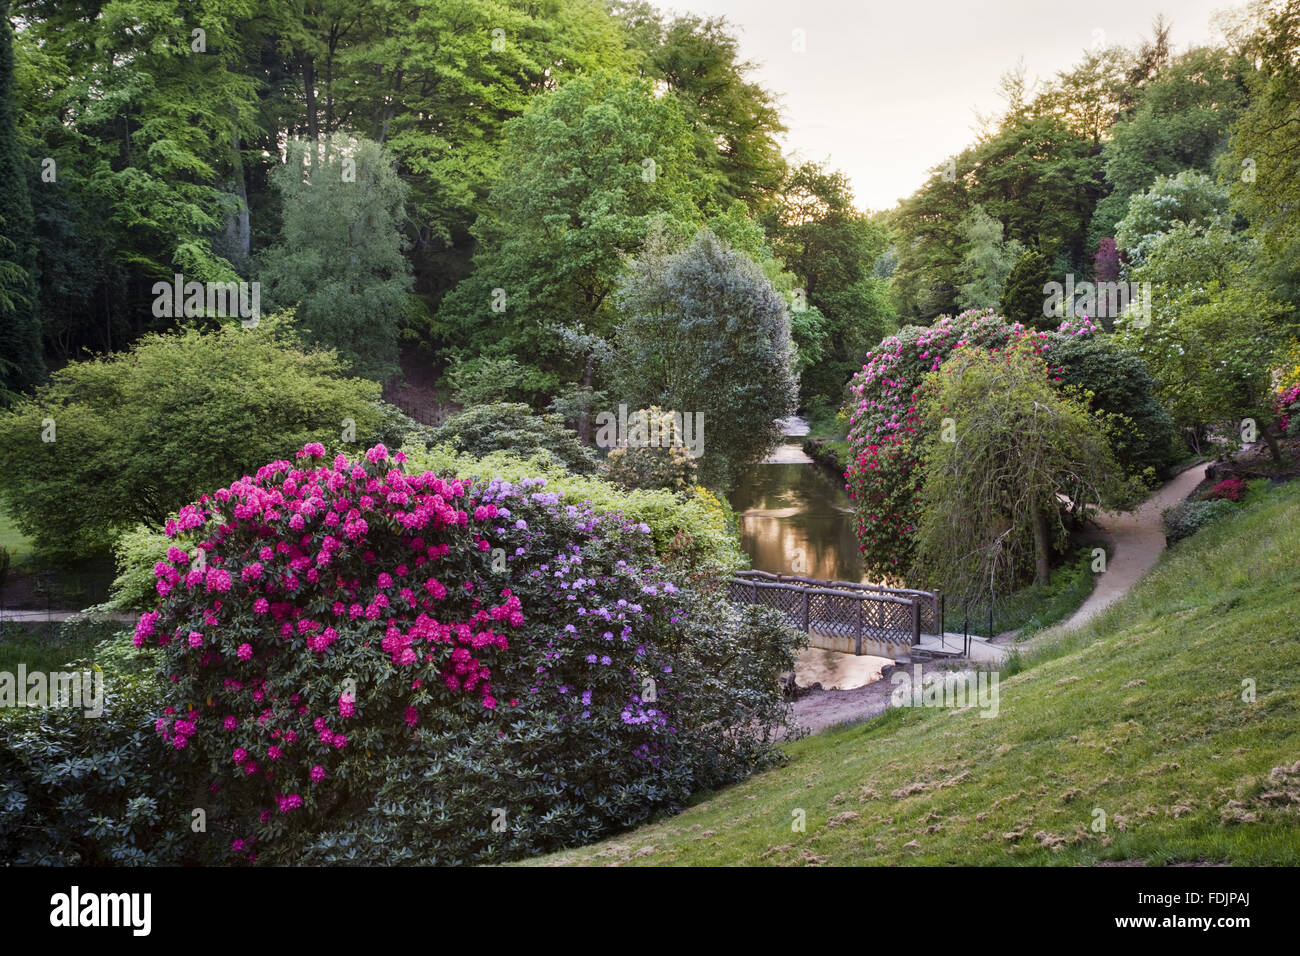 The river and valley-setting of the garden which was created in the late eighteenth century by Samuel Greg, the mill owner, and his wife Hannah, to complement their house. The garden follows the valley of the Bollin river and is part of the Quarry Bank Mi Stock Photo